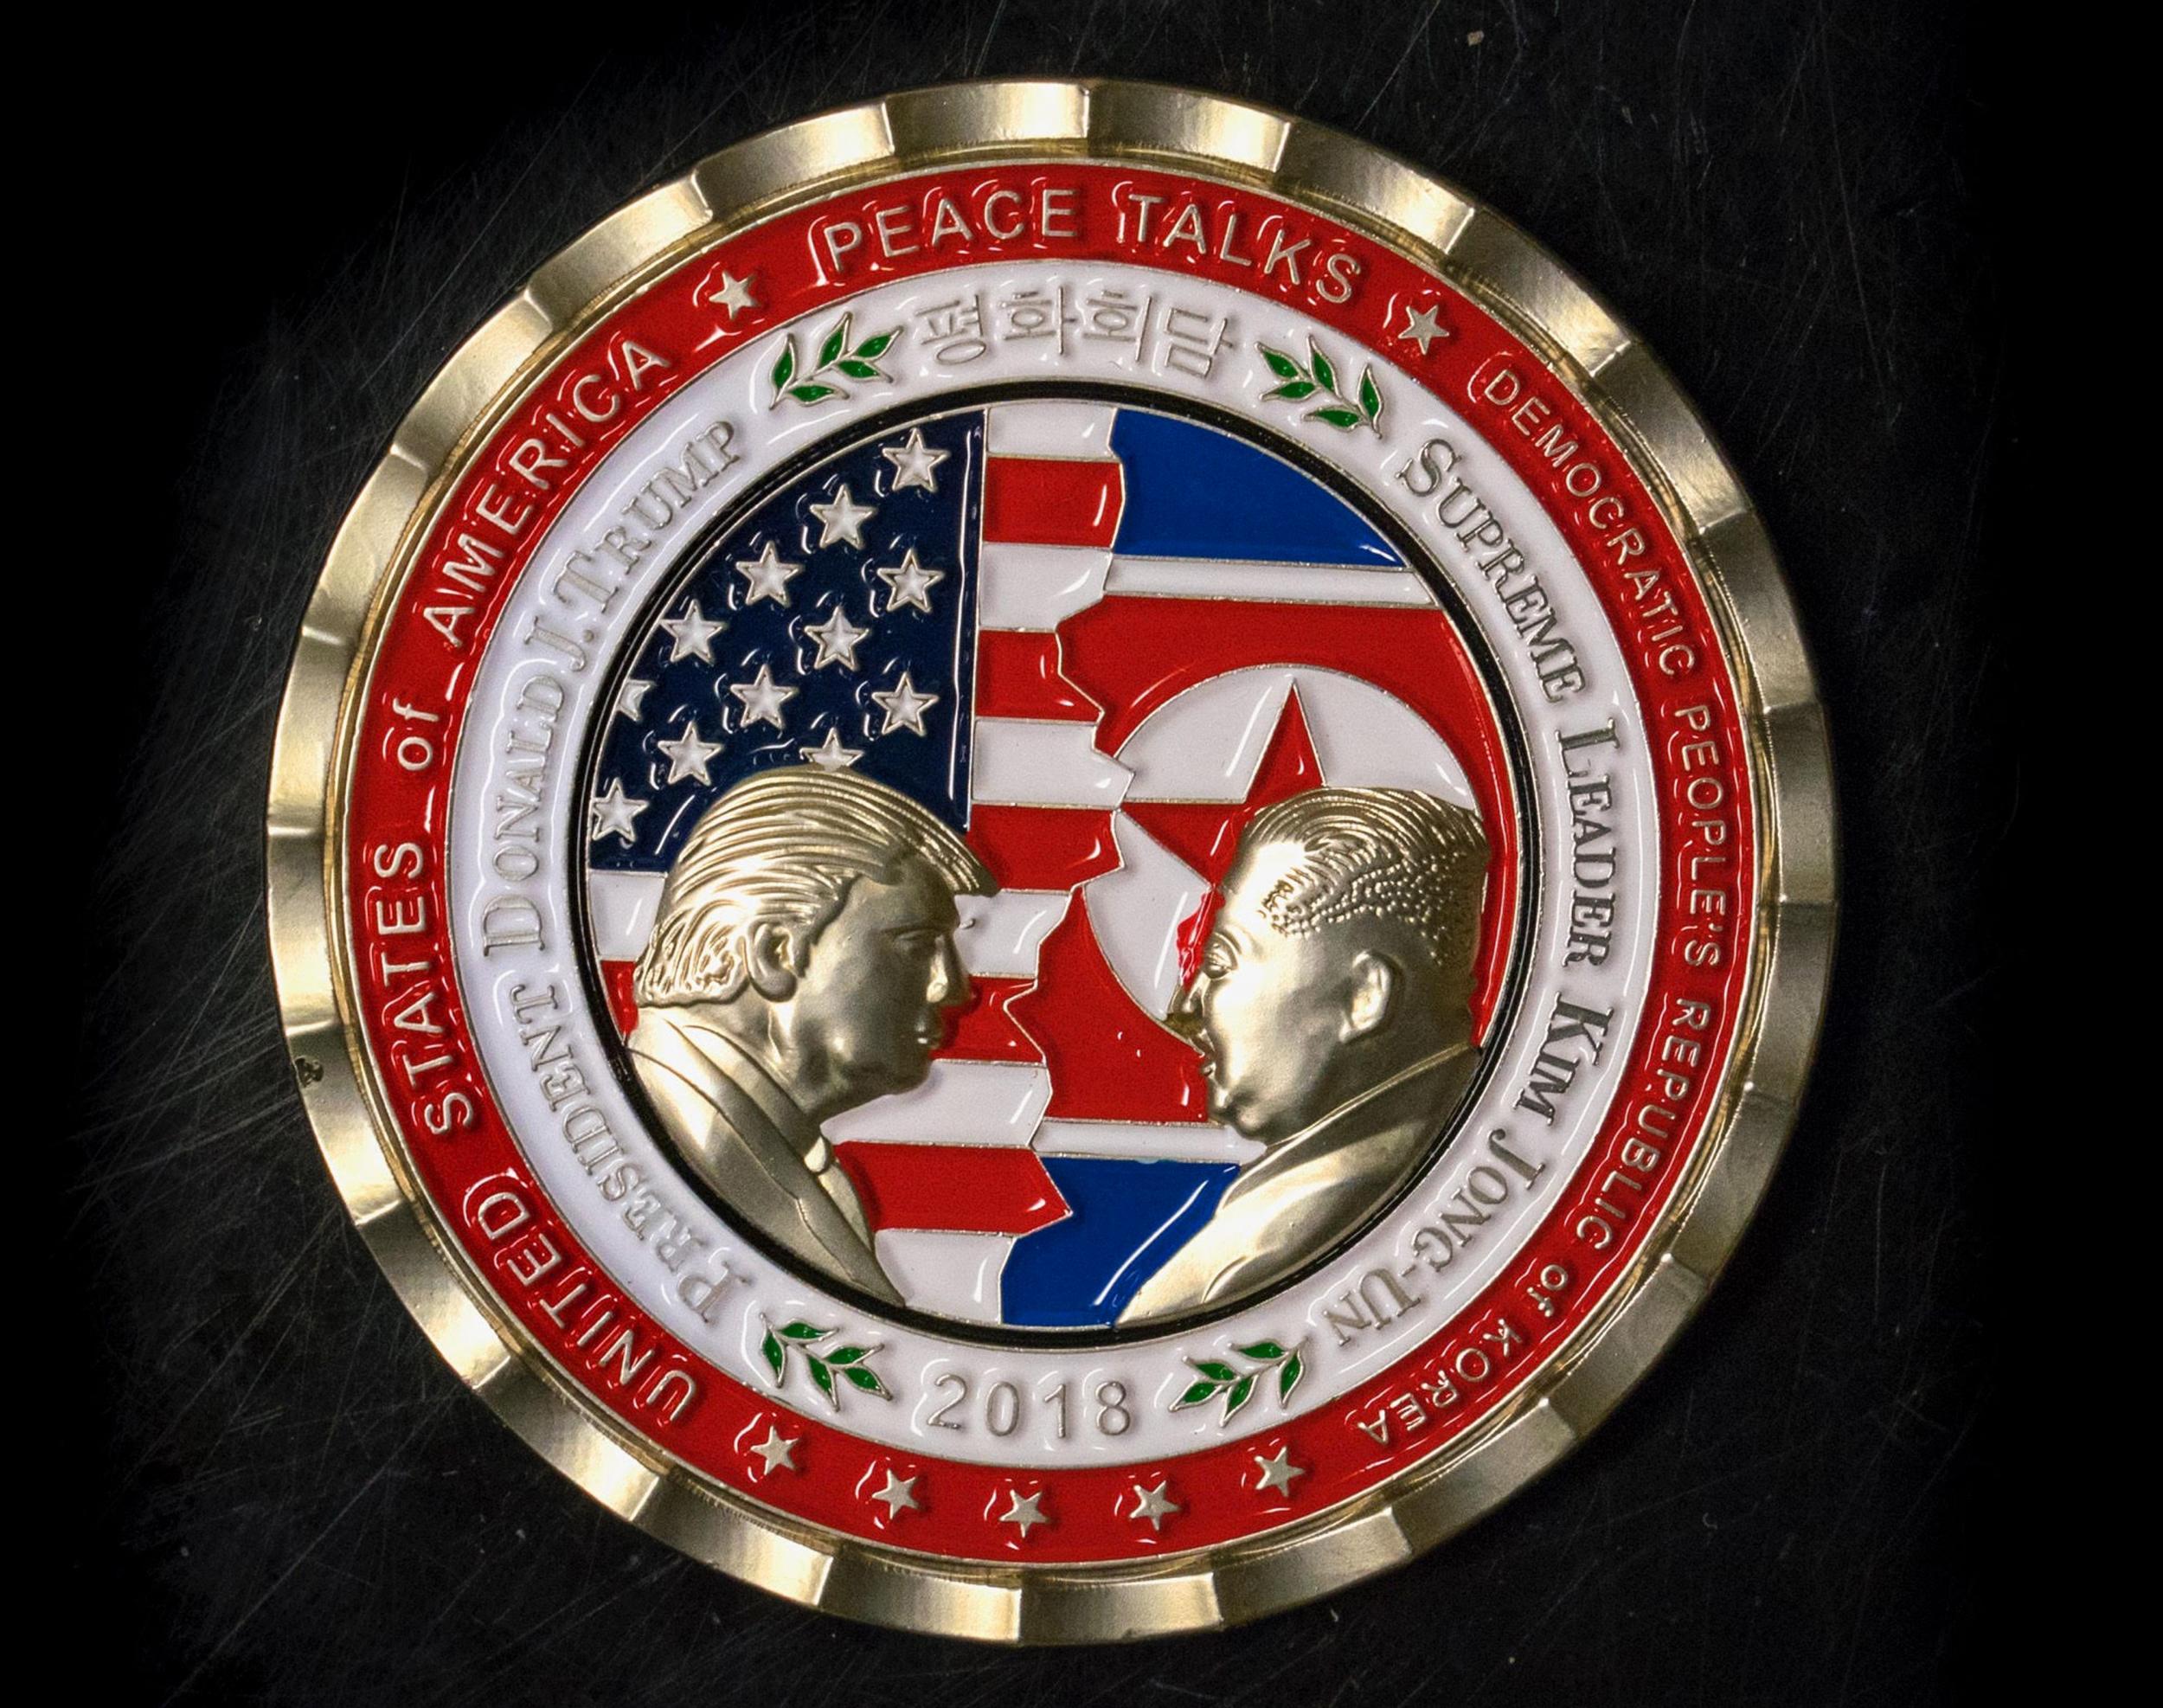 The coin describes the Asian leader as 'supreme leader', a term in common use though not an official title as such